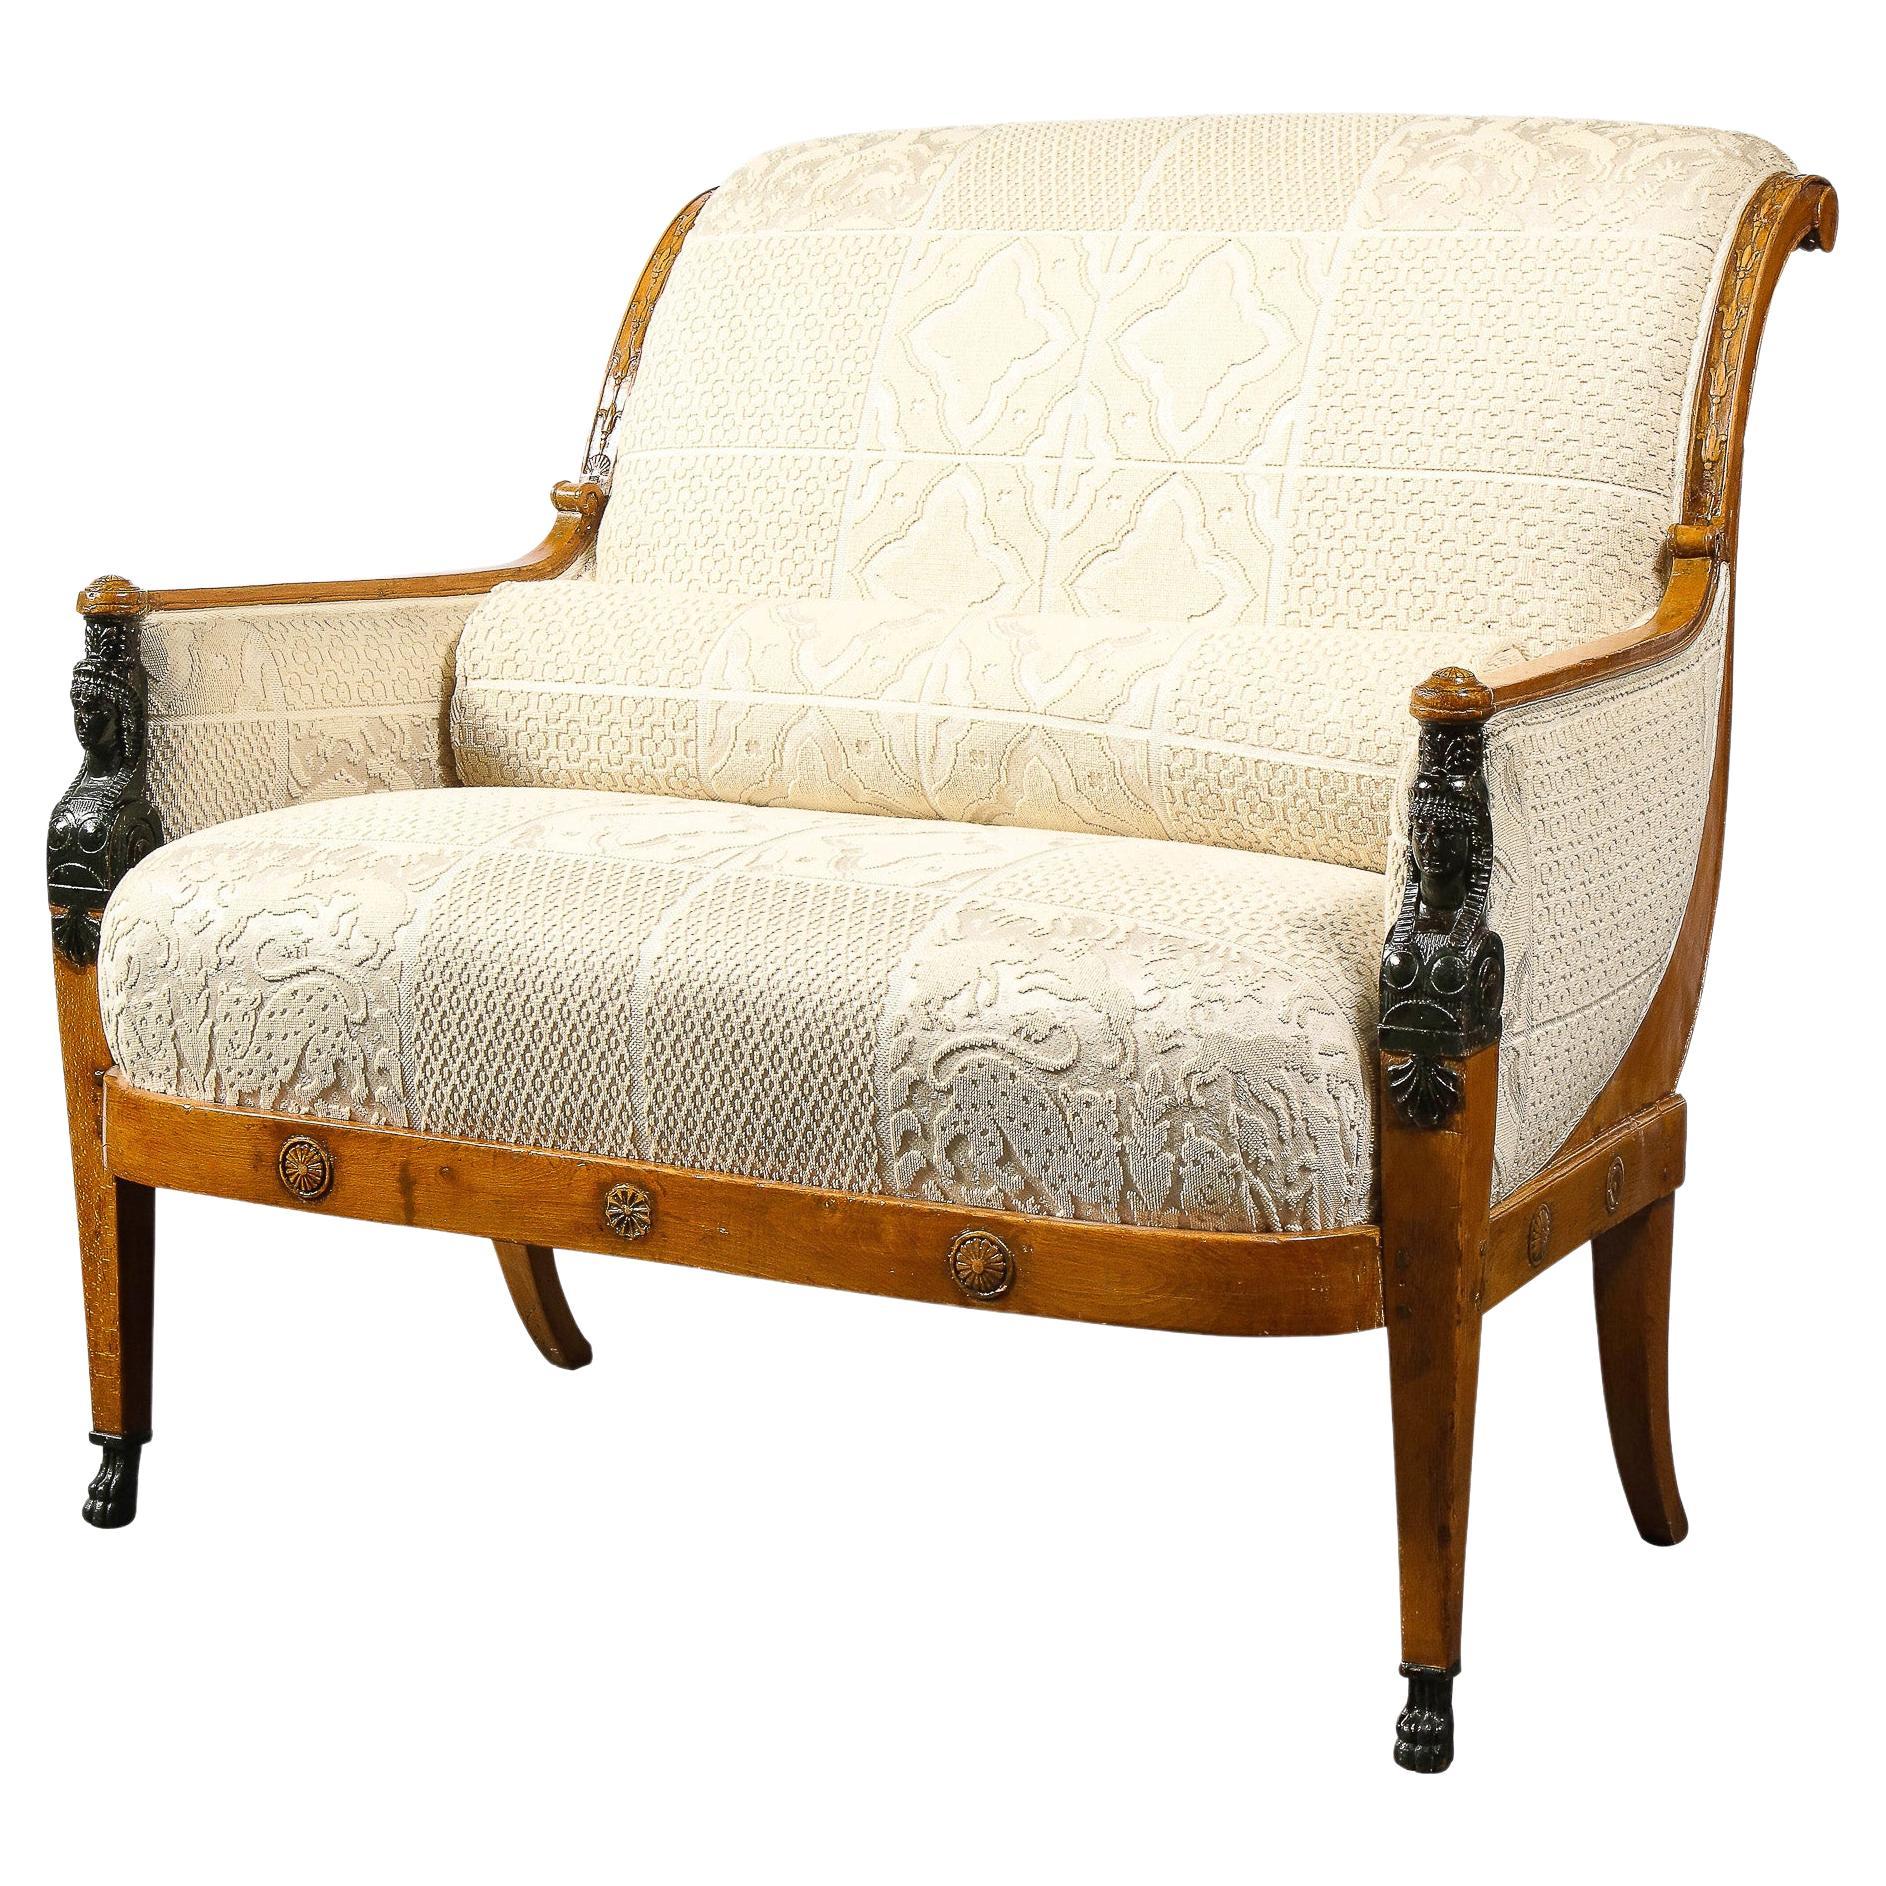 Biedermeier Neoclassical Settee with Scroll Form Back & Saber Leg Supports  For Sale